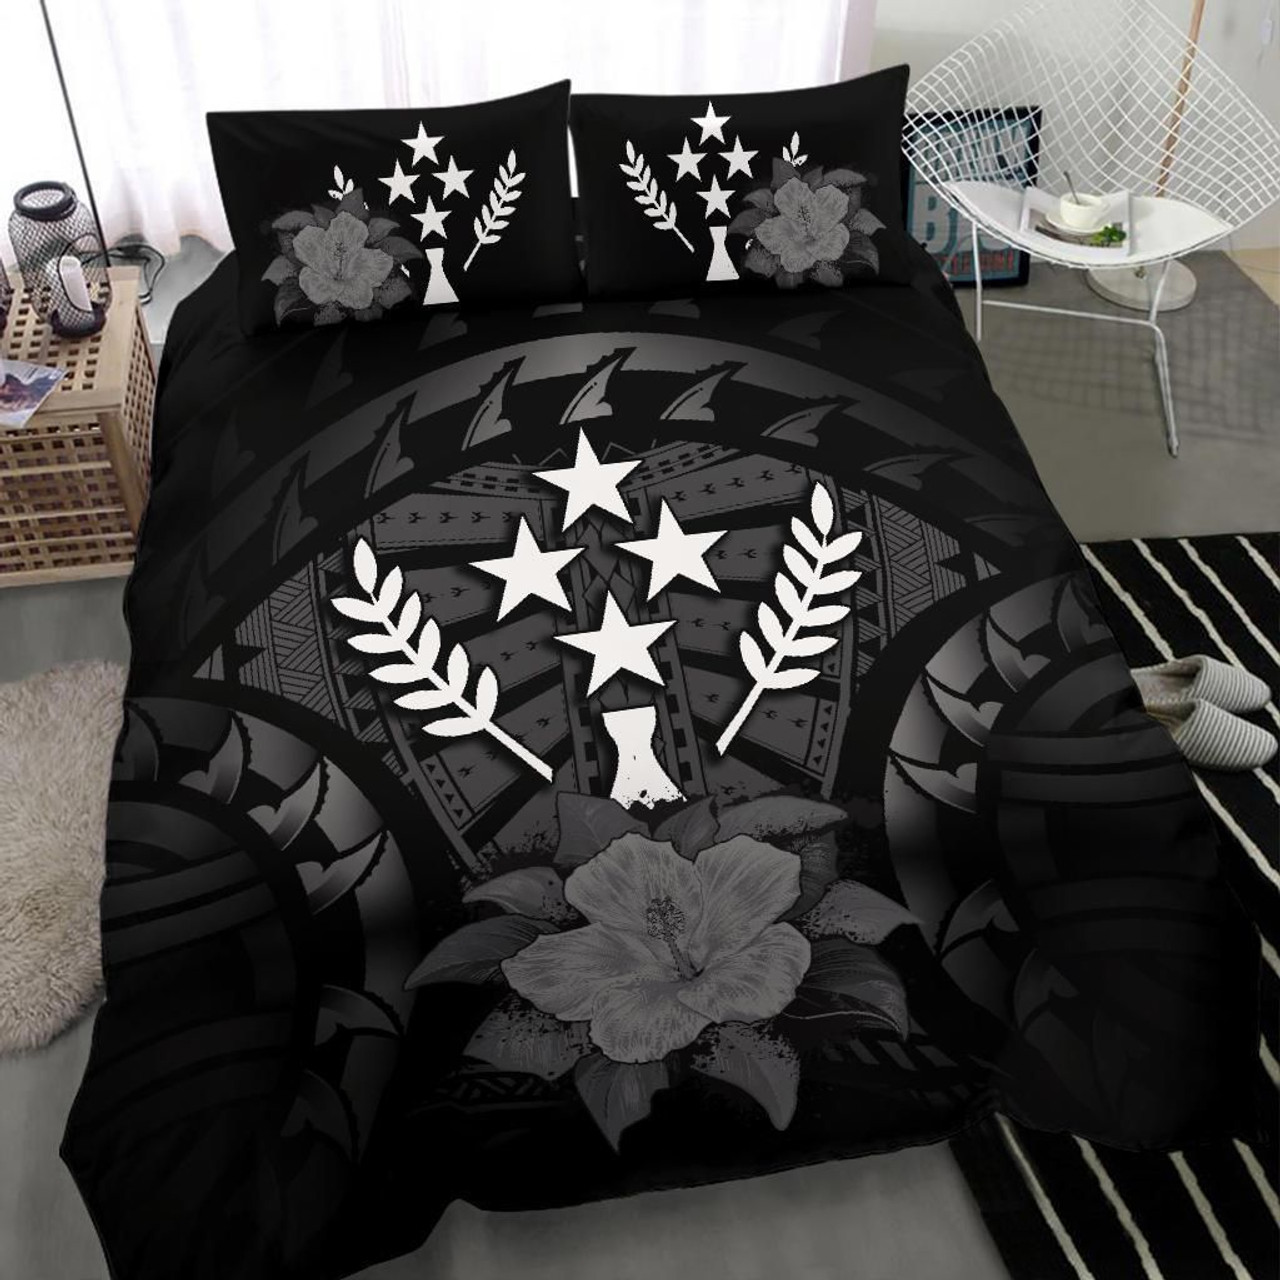 Polynesian Bedding Set Federated States Of Micronesia Duvet Cover Set Bright Style 6